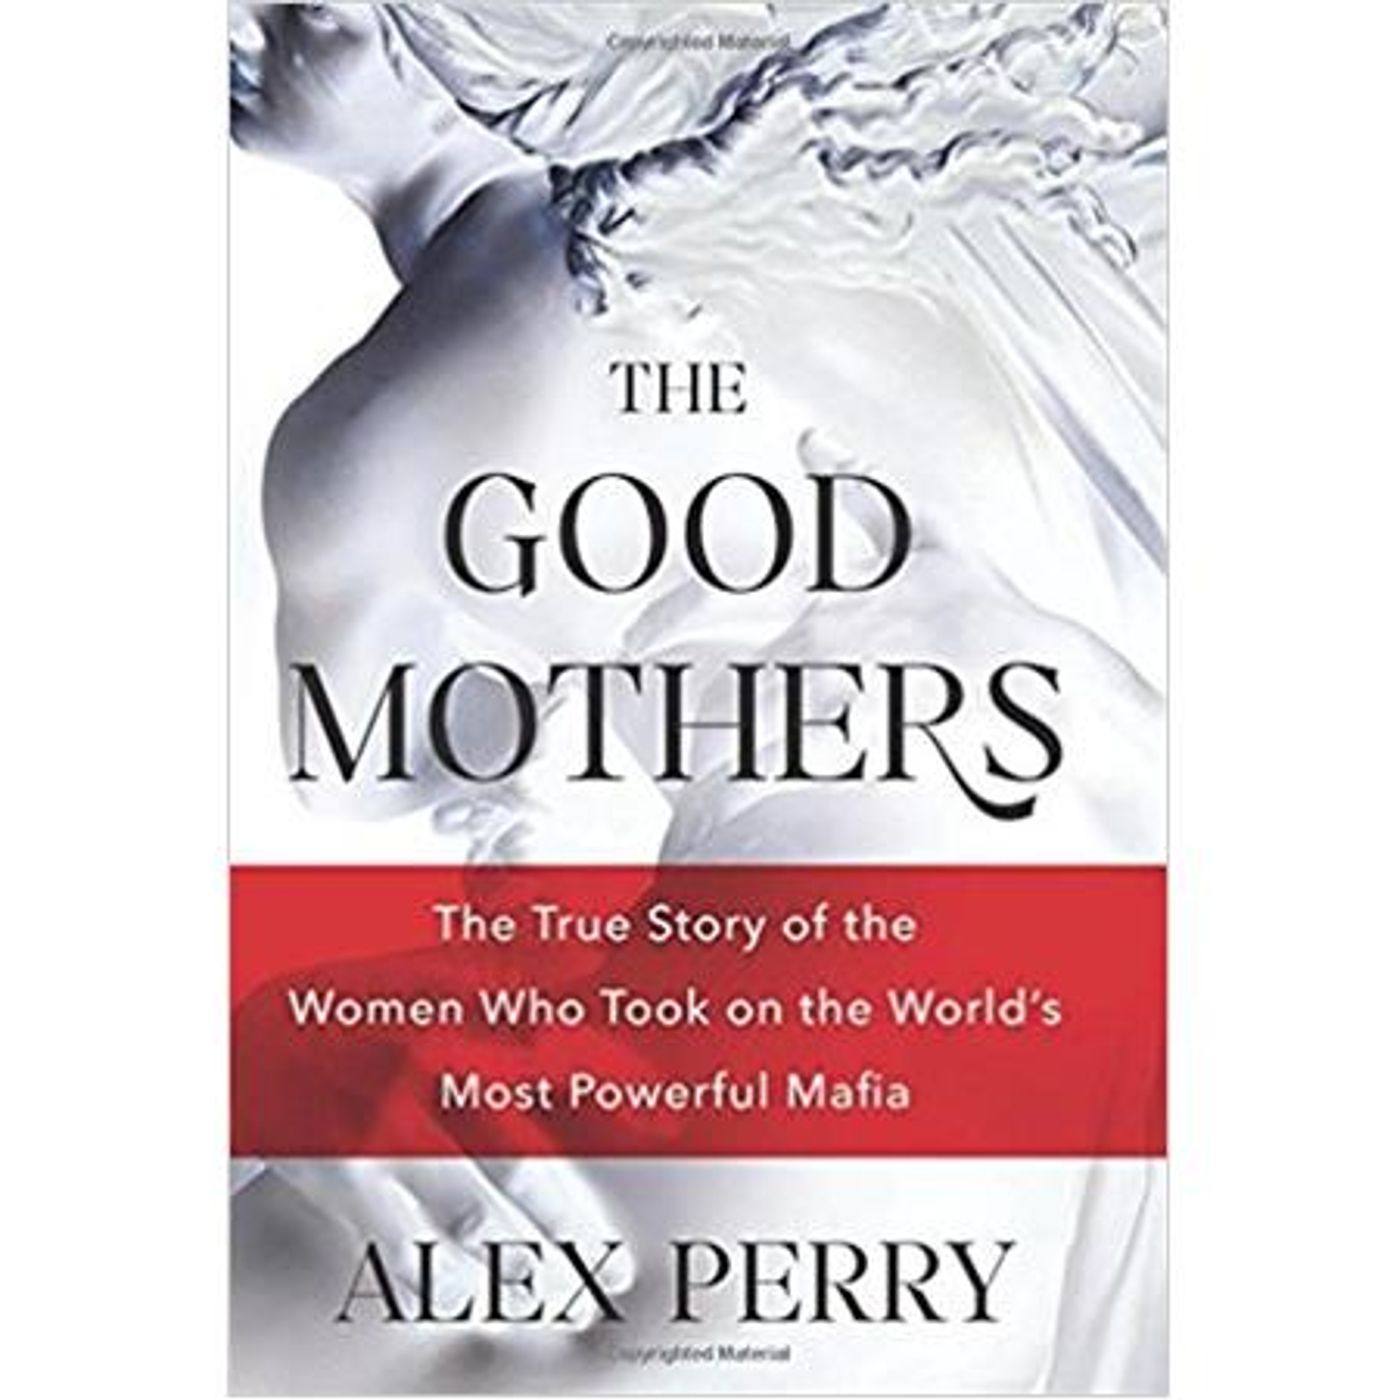 THE GOOD MOTHERS-Alex Perry